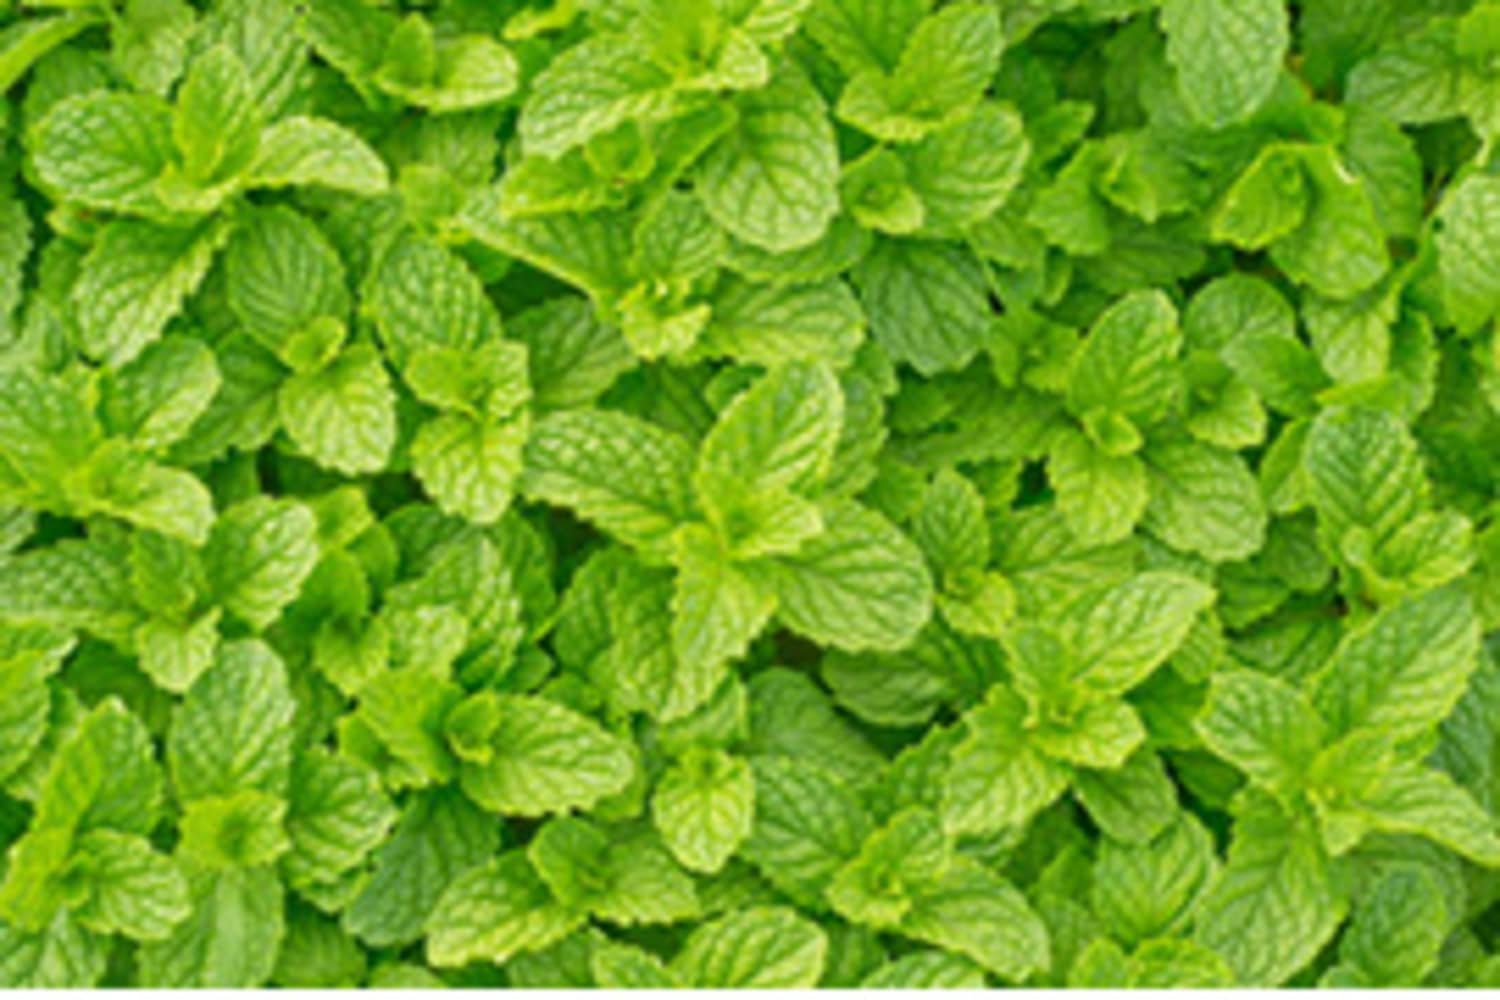 Does “Mint” Mean Peppermint or Spearmint?